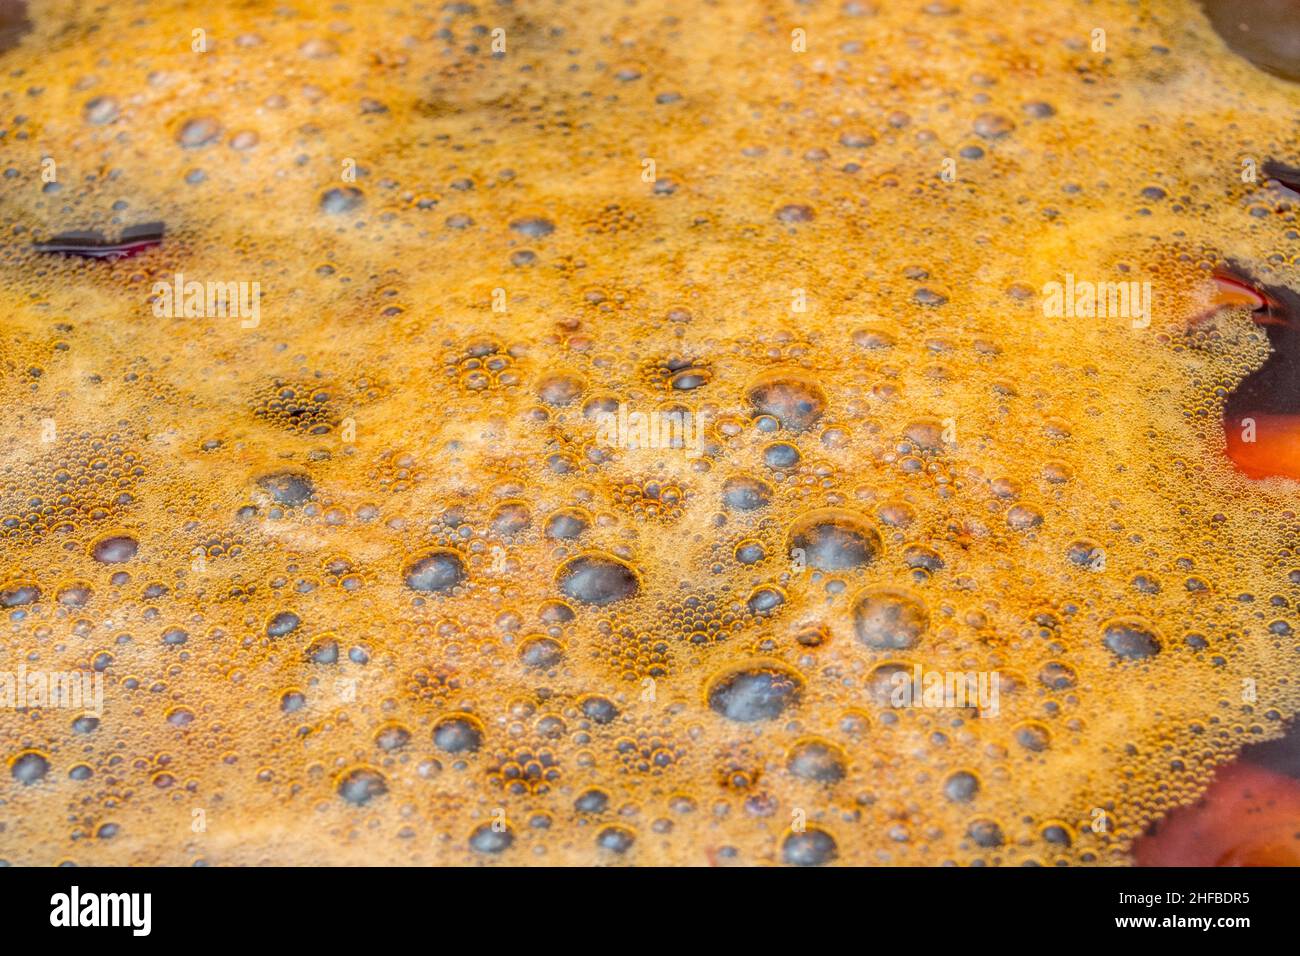 Gas bubbles from Hydrogen Peroxide / H2O2 in presence of mild acid working on rusty steel. For chemical reaction, decomposition, school chemistry. Stock Photo